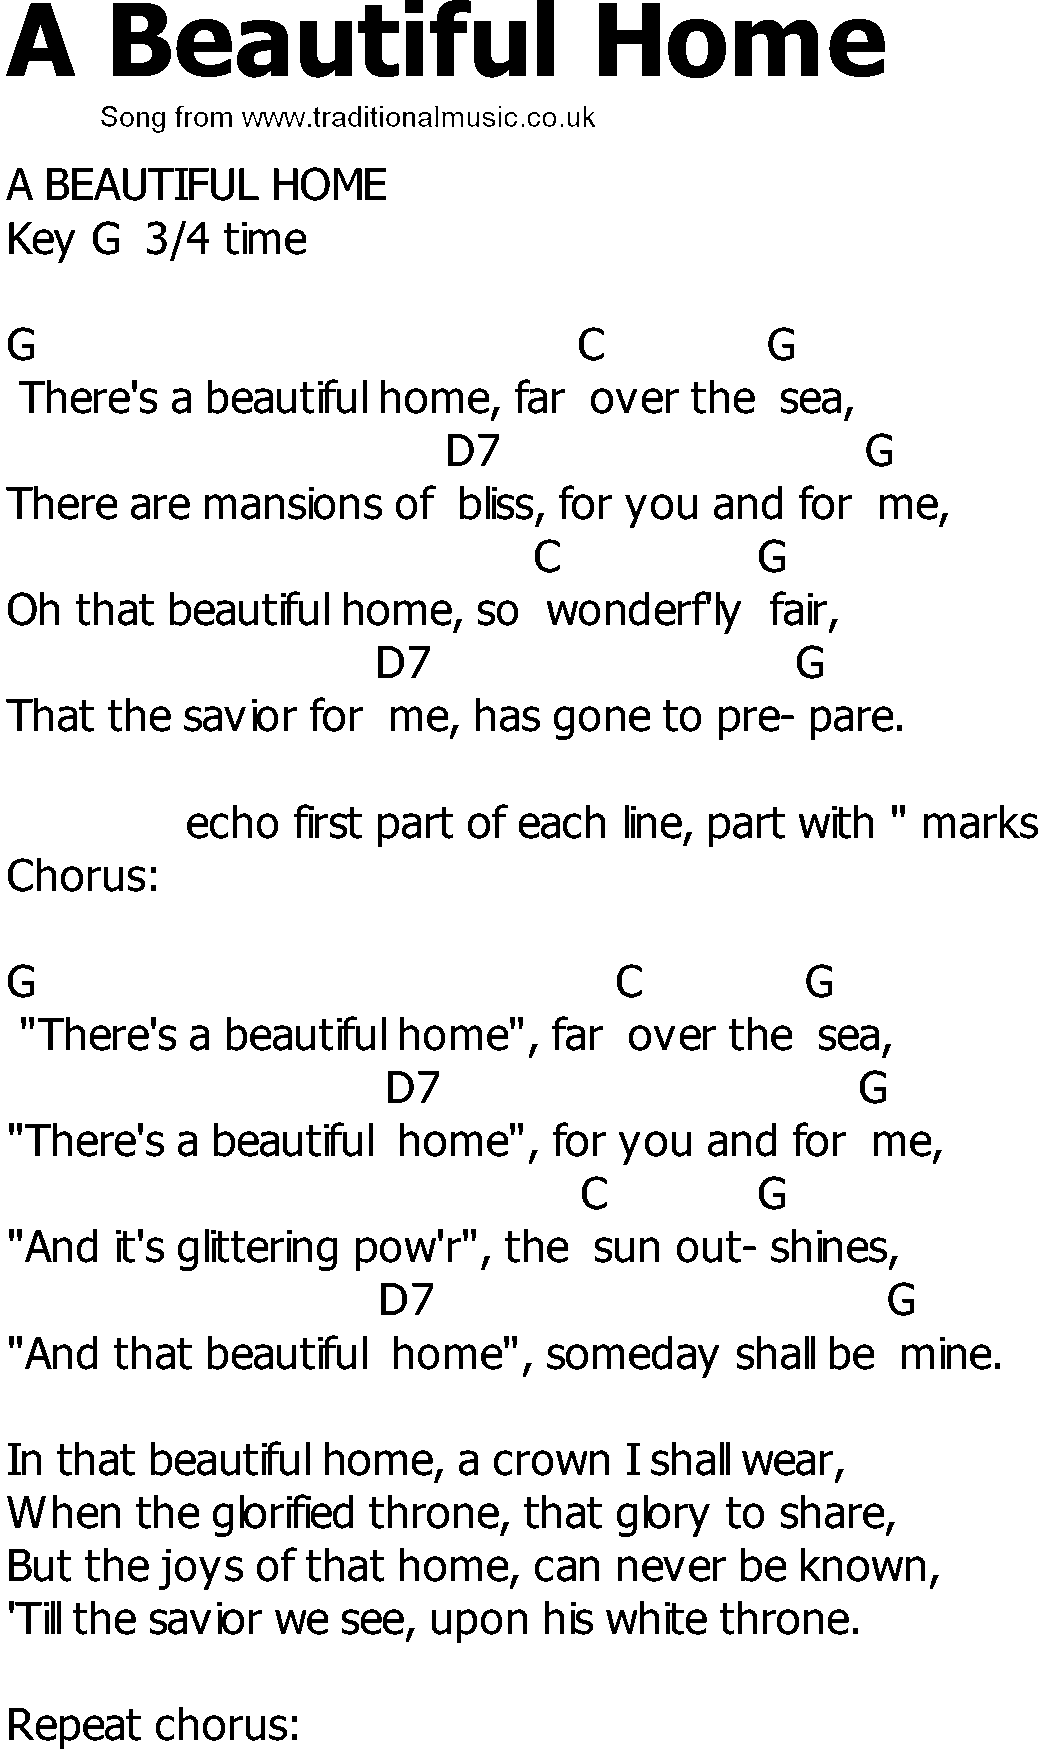 Old Country song lyrics with chords - A Beautiful Home